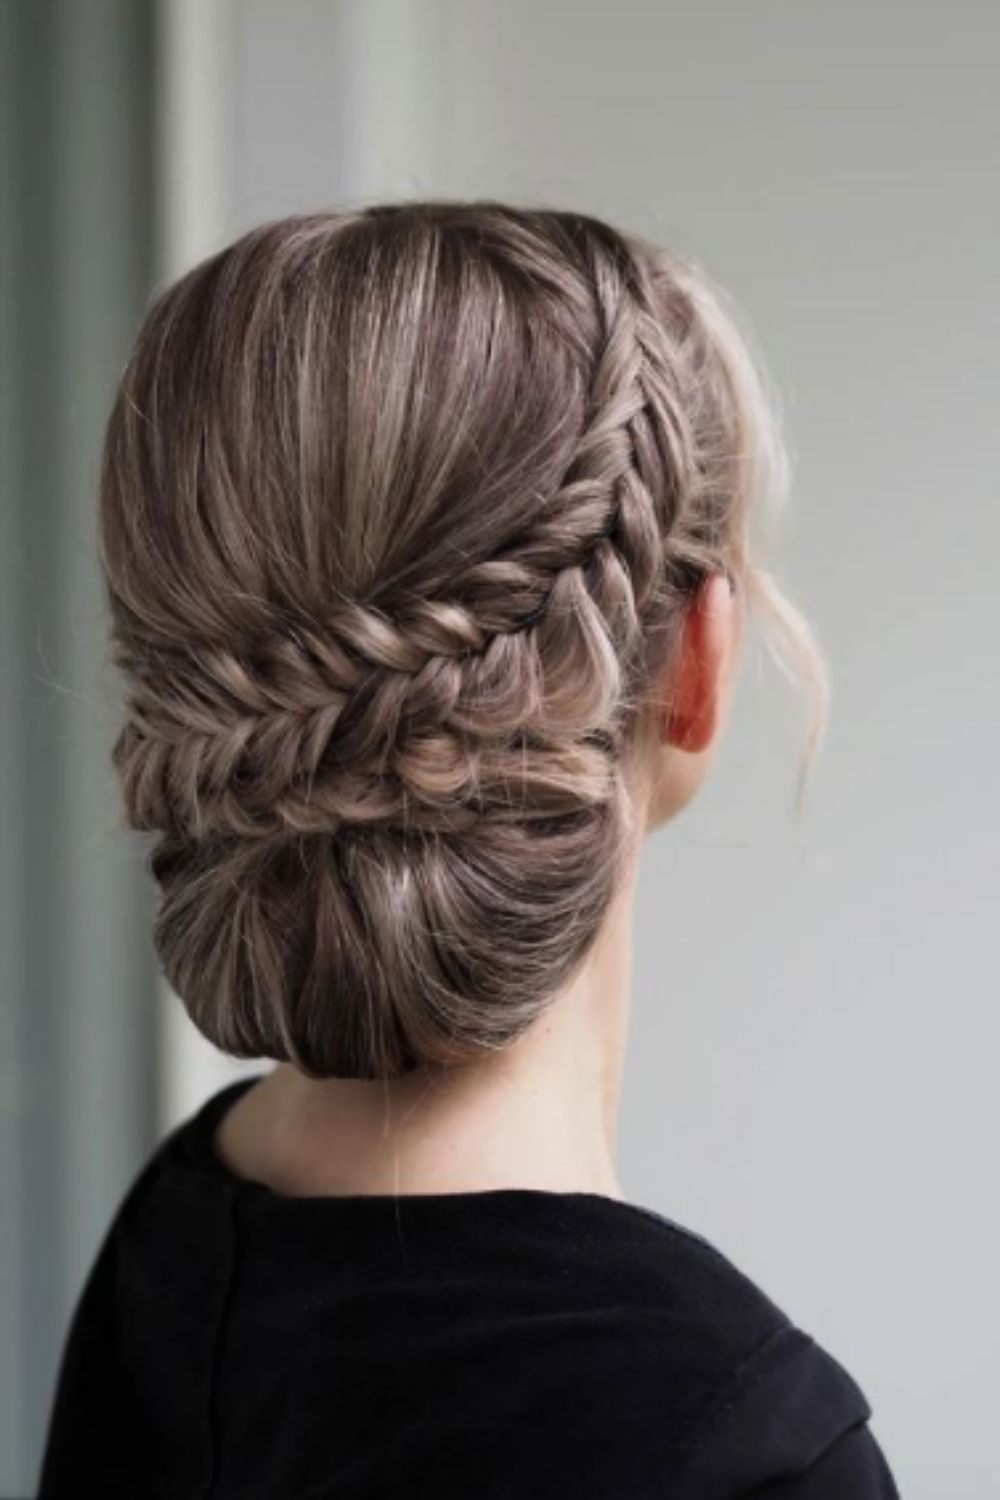 Crown braided hair for homecoming